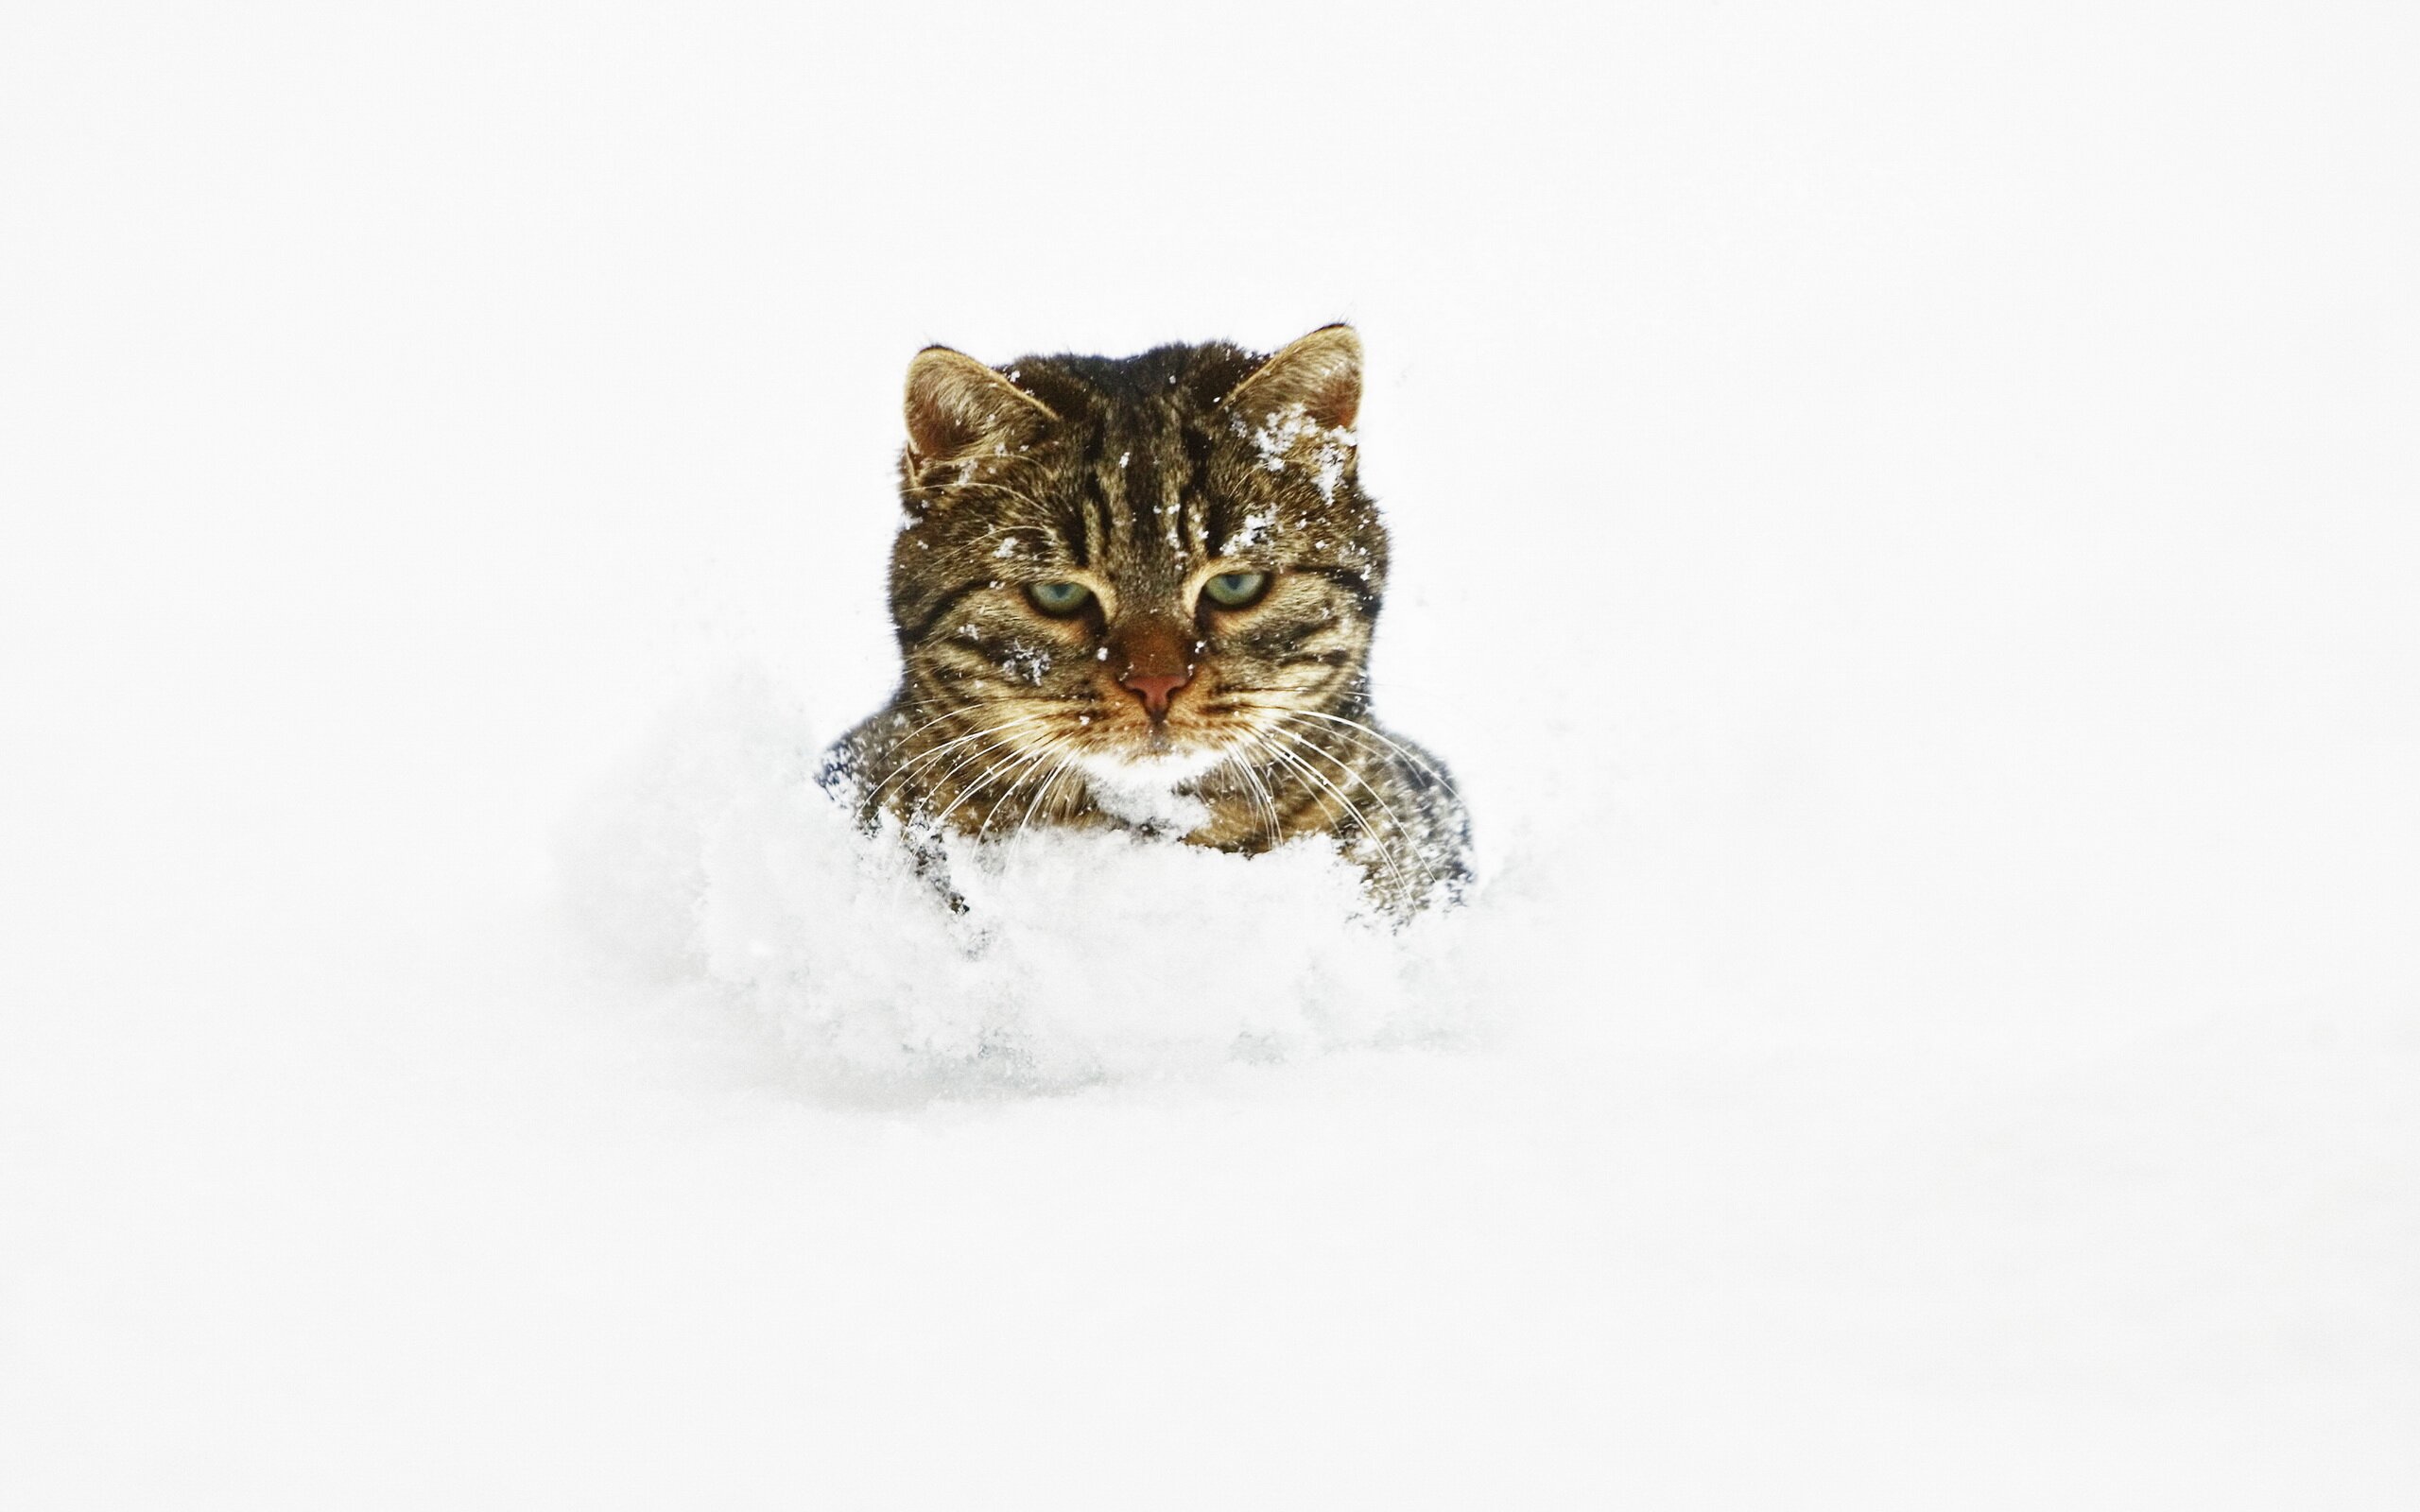 Cat in the snow HD Wallpapers photo